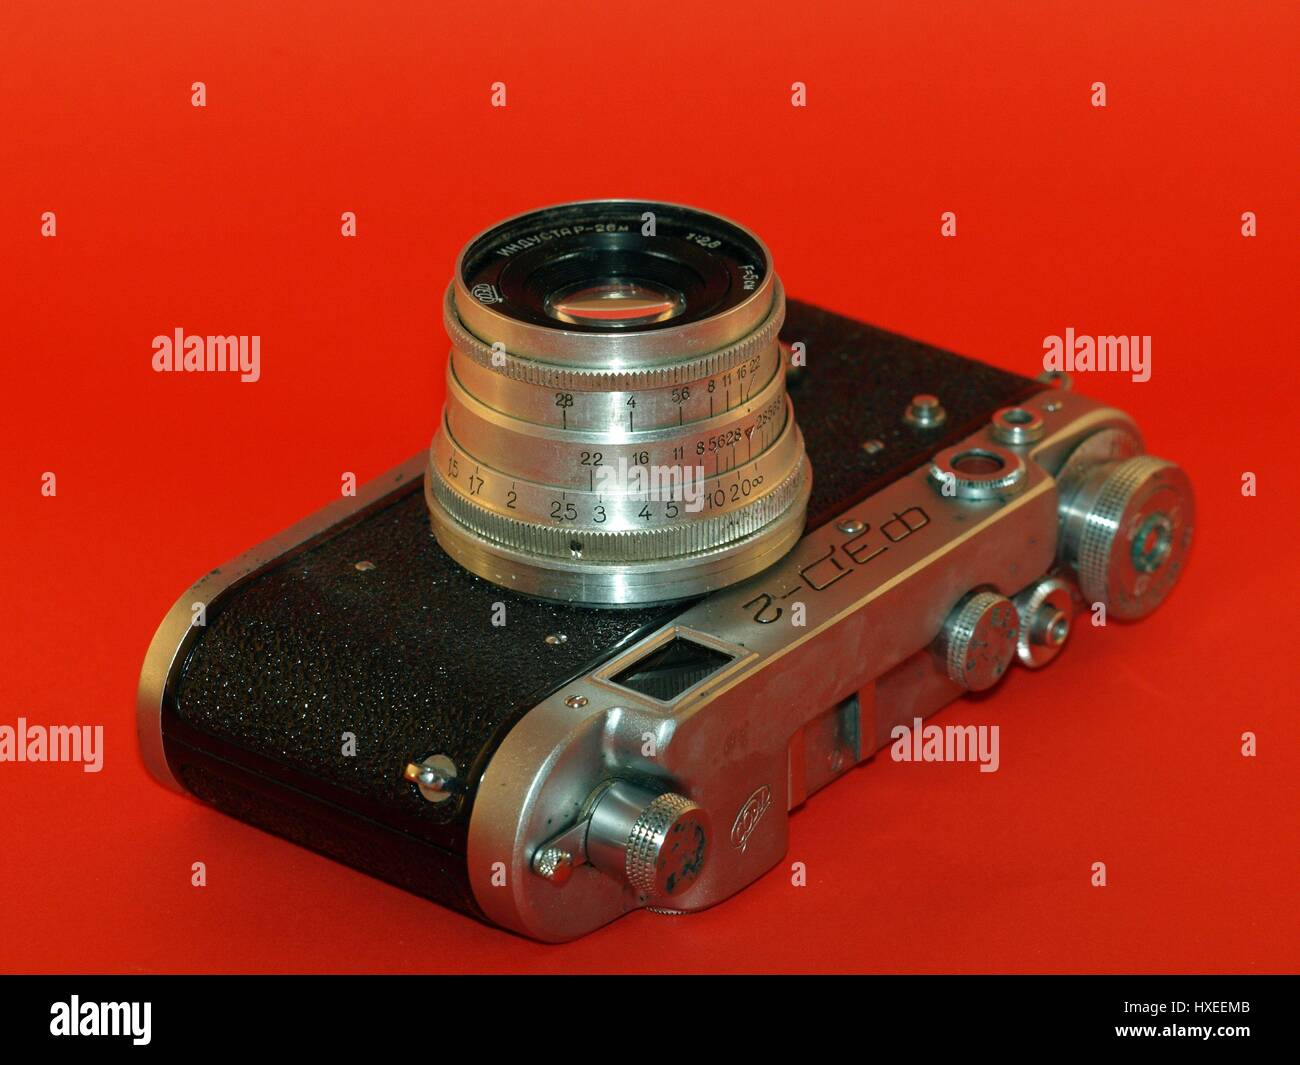 Old antique camera with leather case on red background Stock Photo